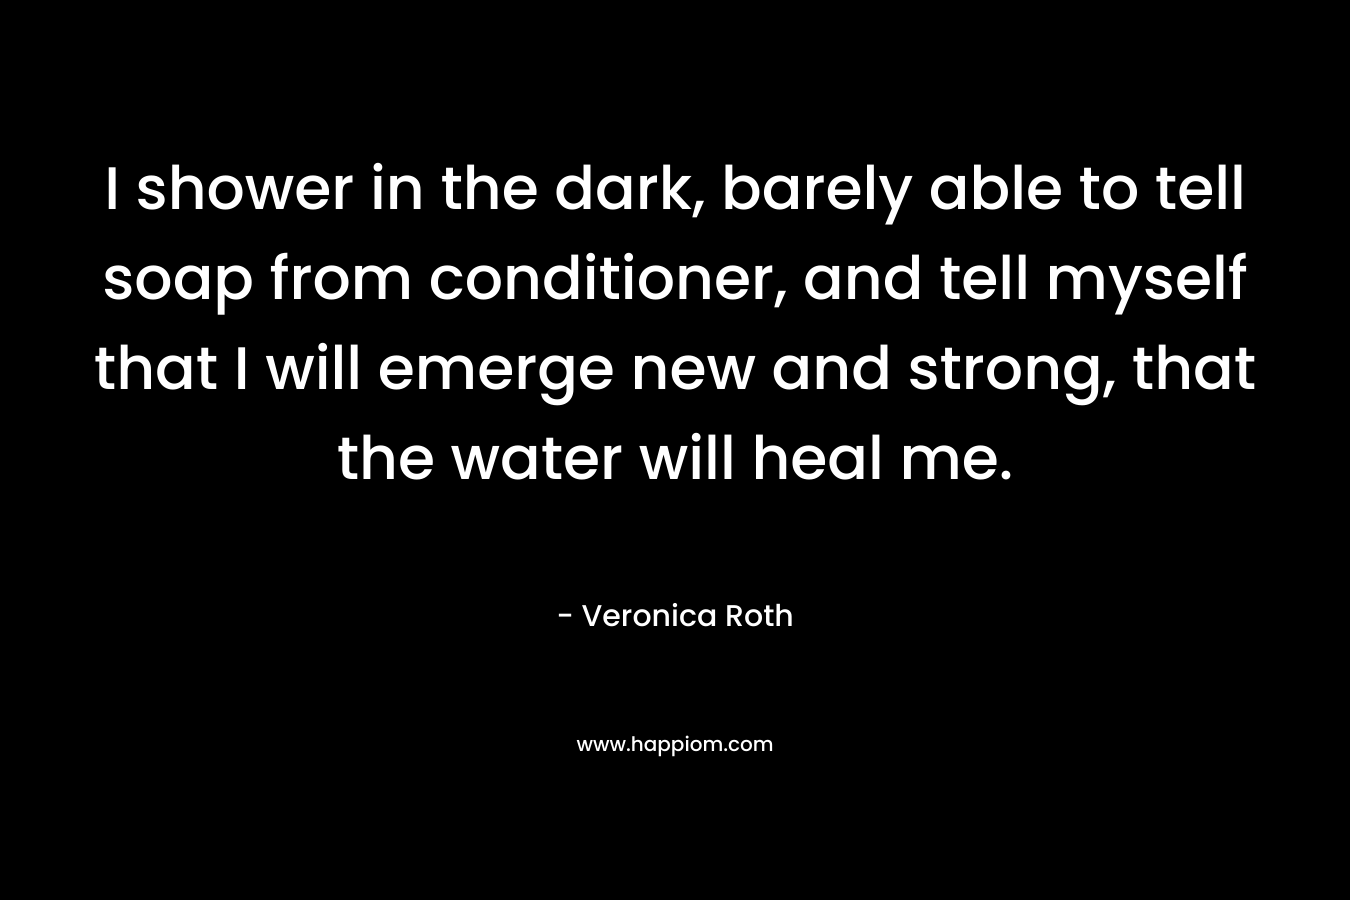 I shower in the dark, barely able to tell soap from conditioner, and tell myself that I will emerge new and strong, that the water will heal me. – Veronica Roth